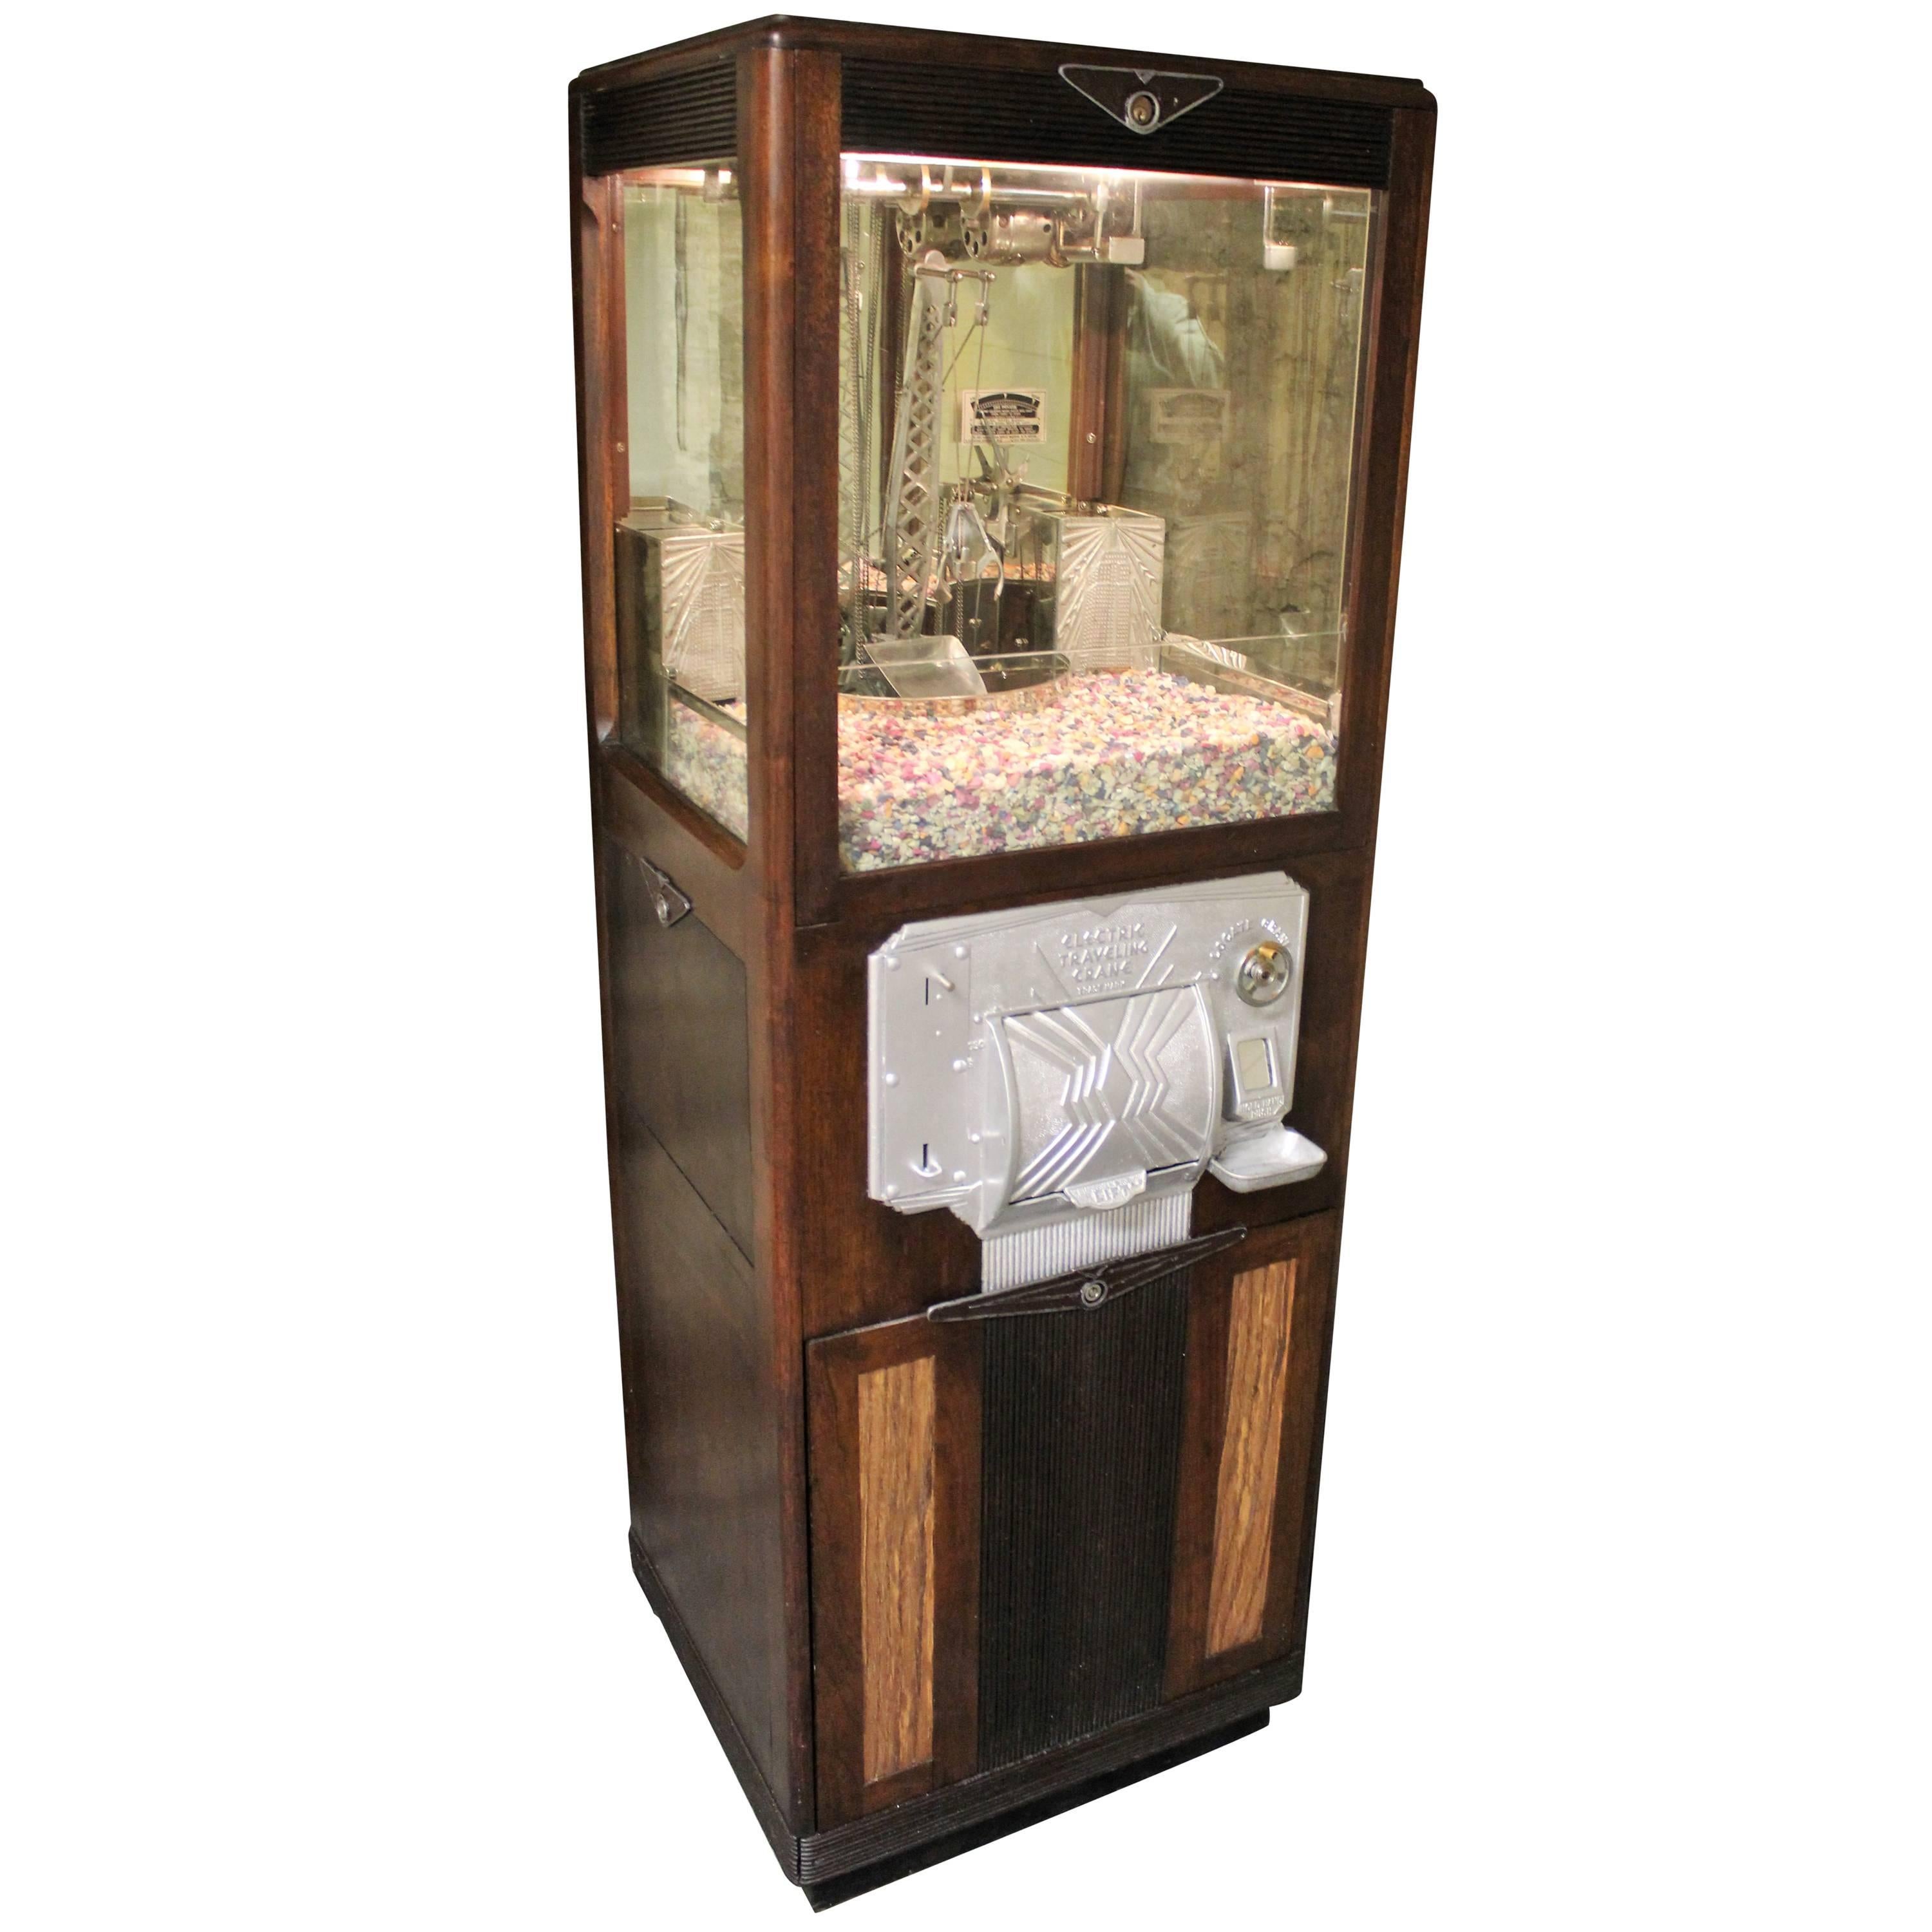 International Mutoscope Coin-Operated Electric Traveling Crane